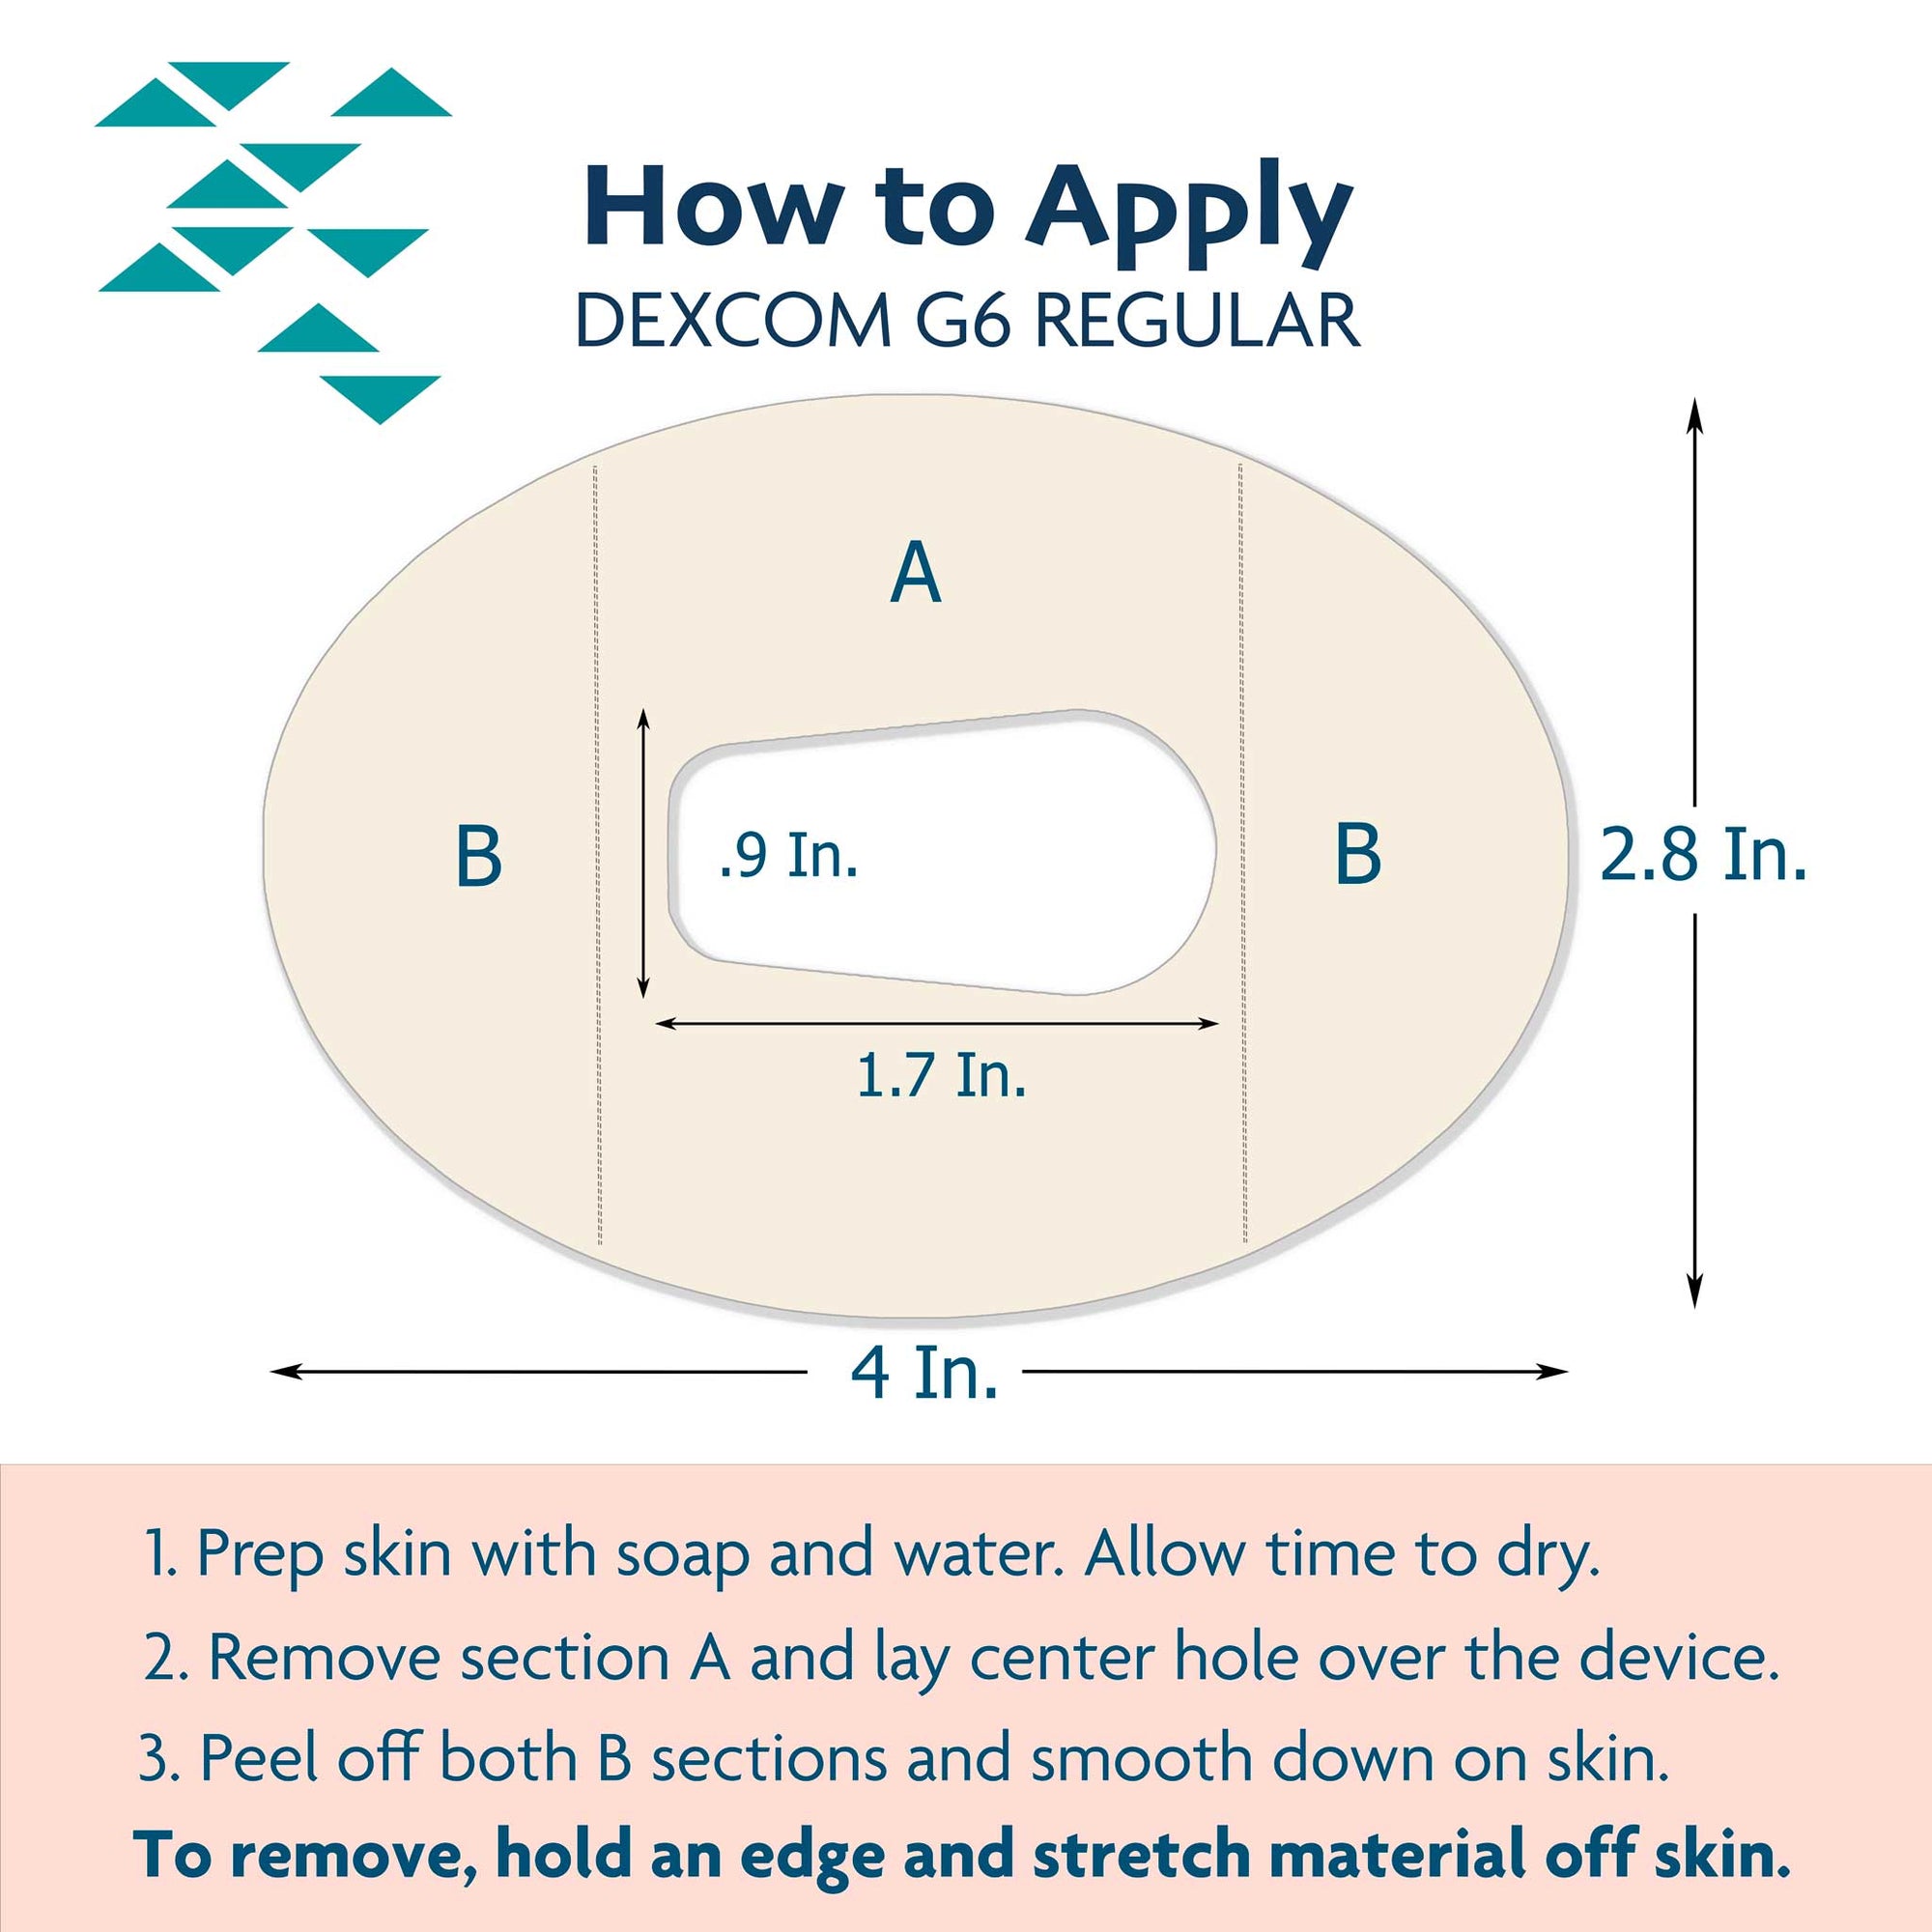 Instructions to properly apply Dexcom G6 CGM overpatch